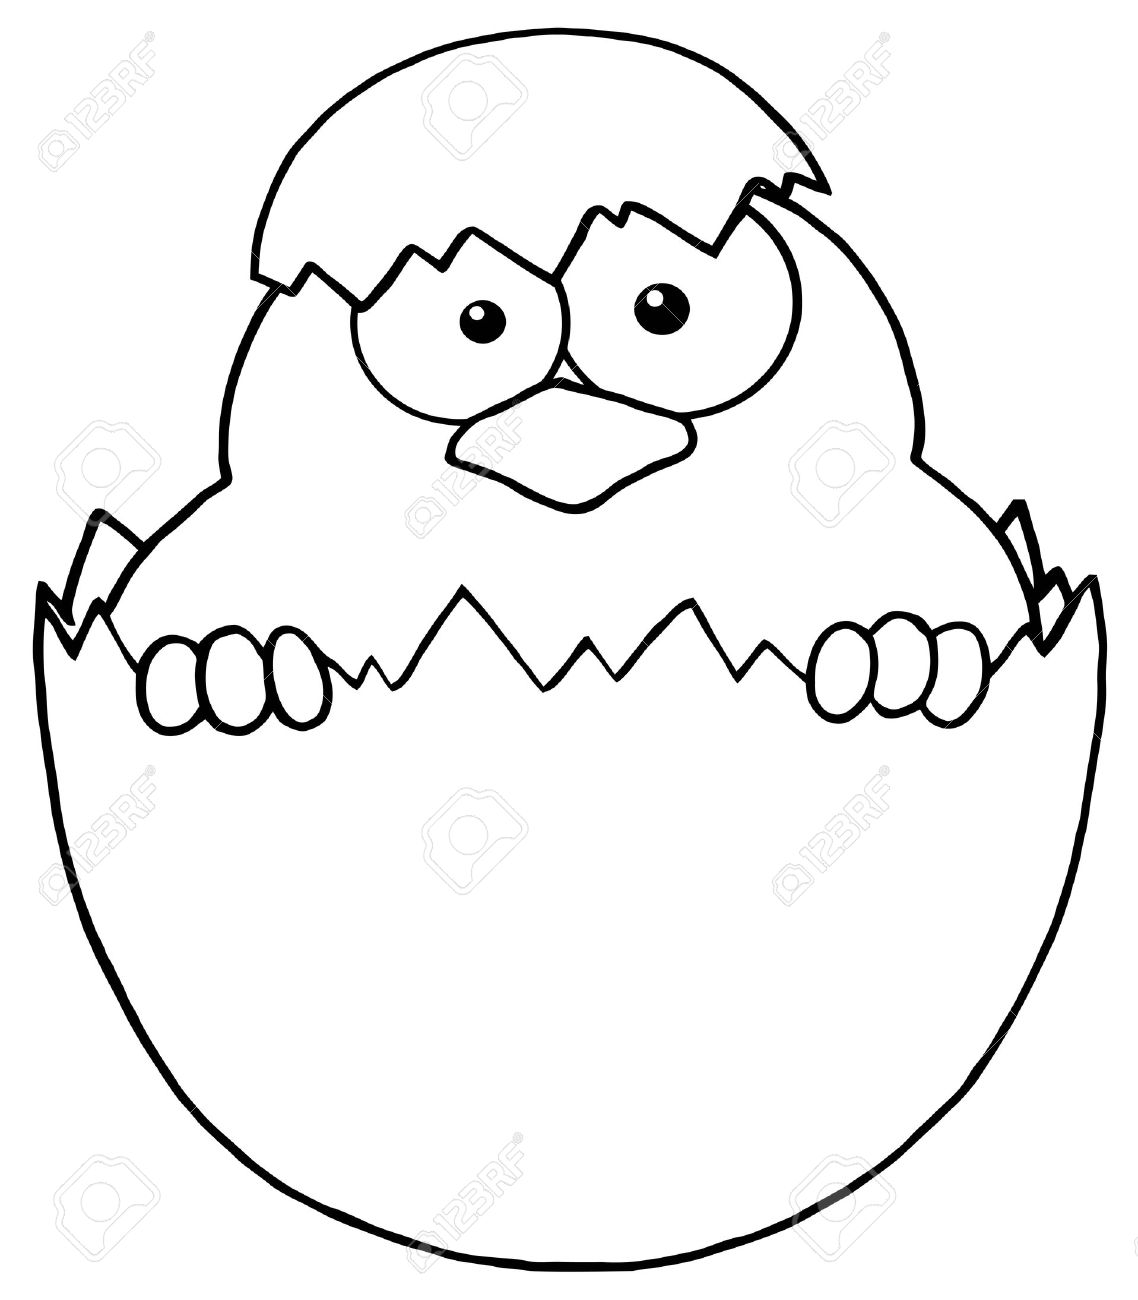 Free egg cracked egg clipart collection